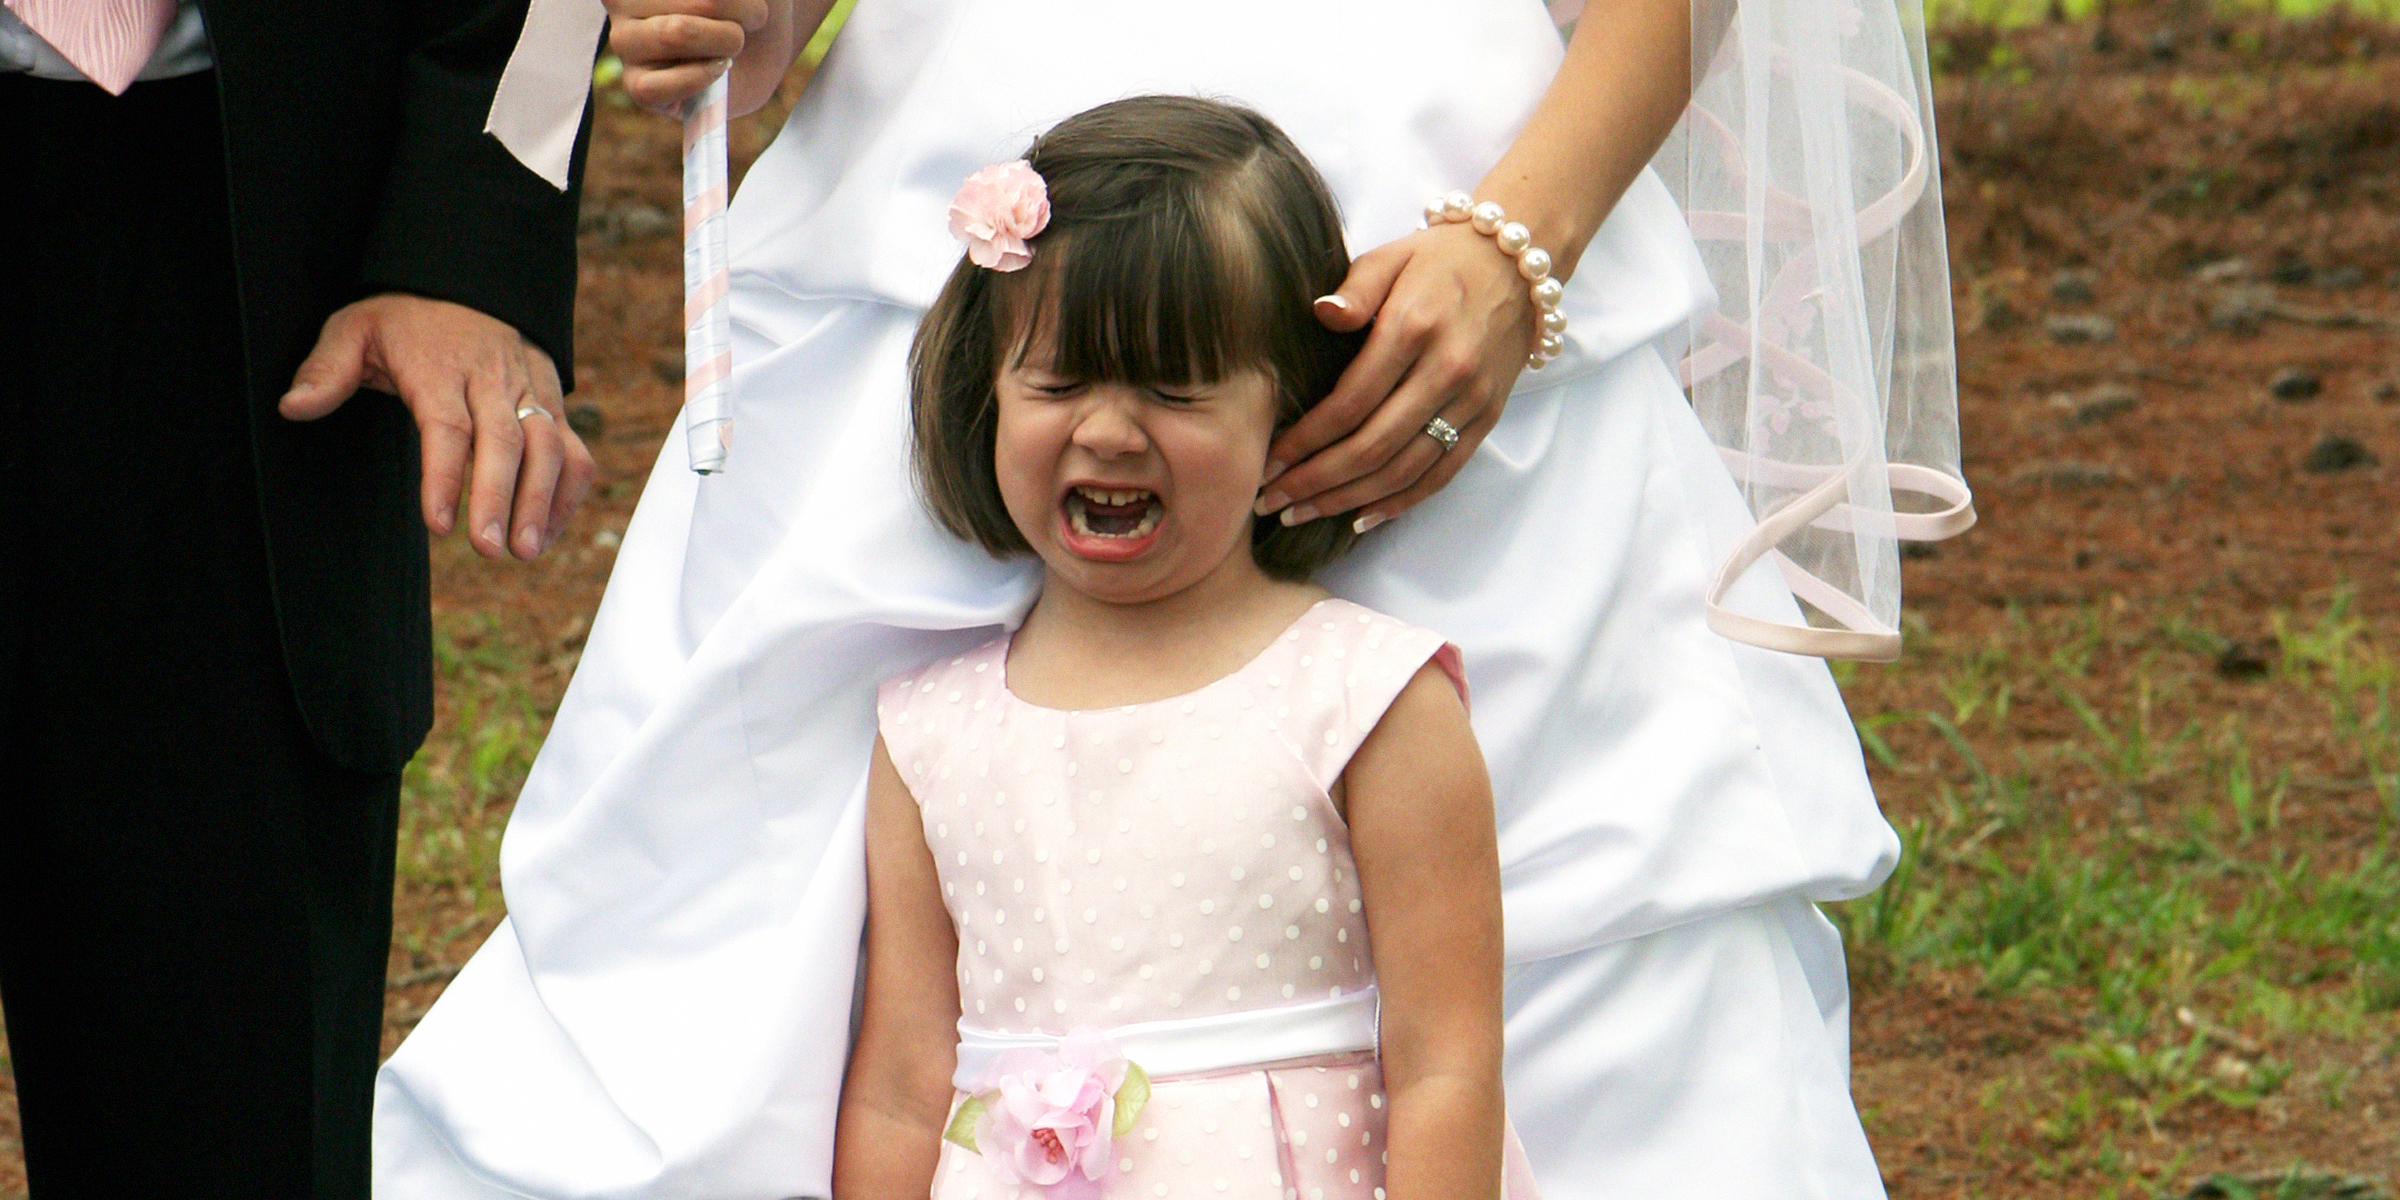 A little girl crying during a wedding | Source: Getty Images